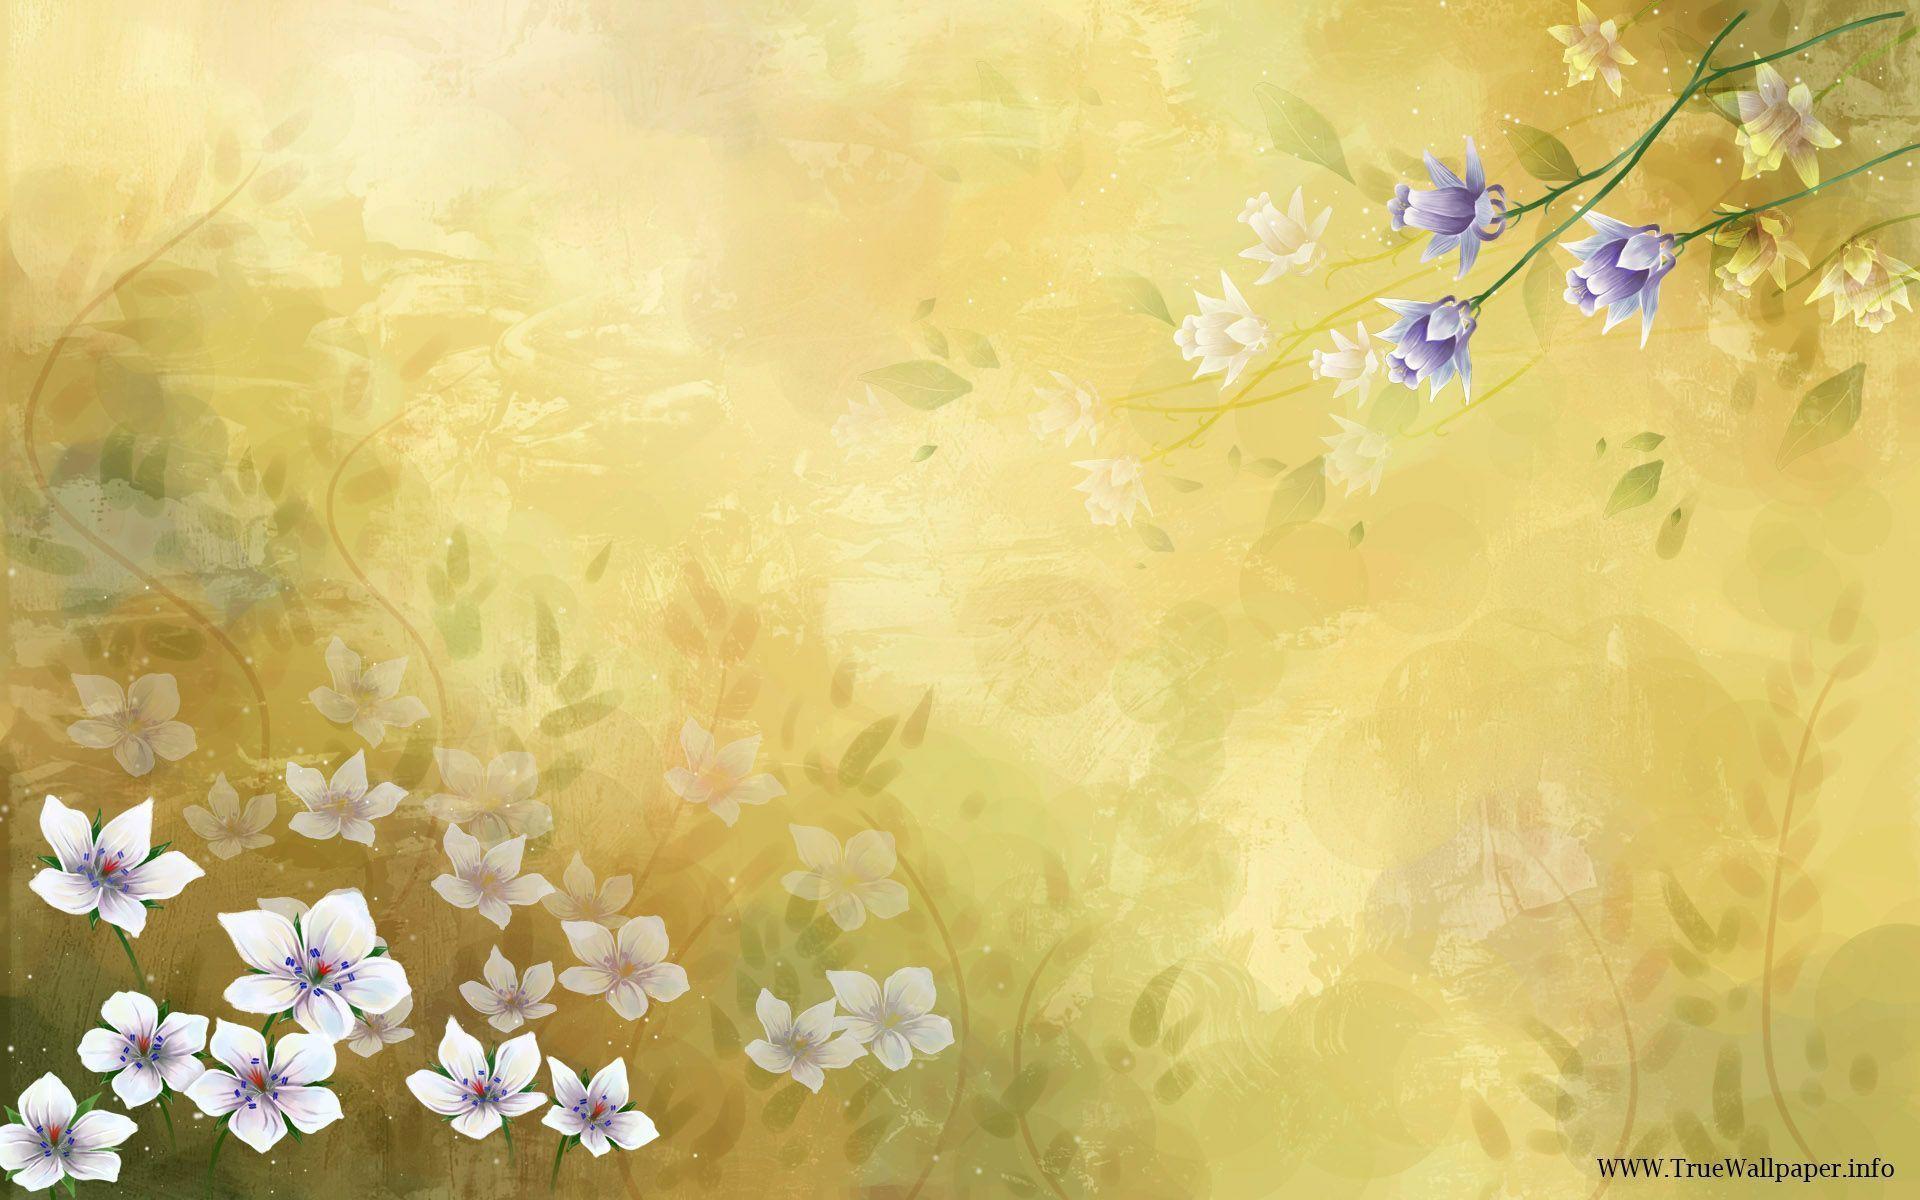 image For > Background Wallpaper Flowers